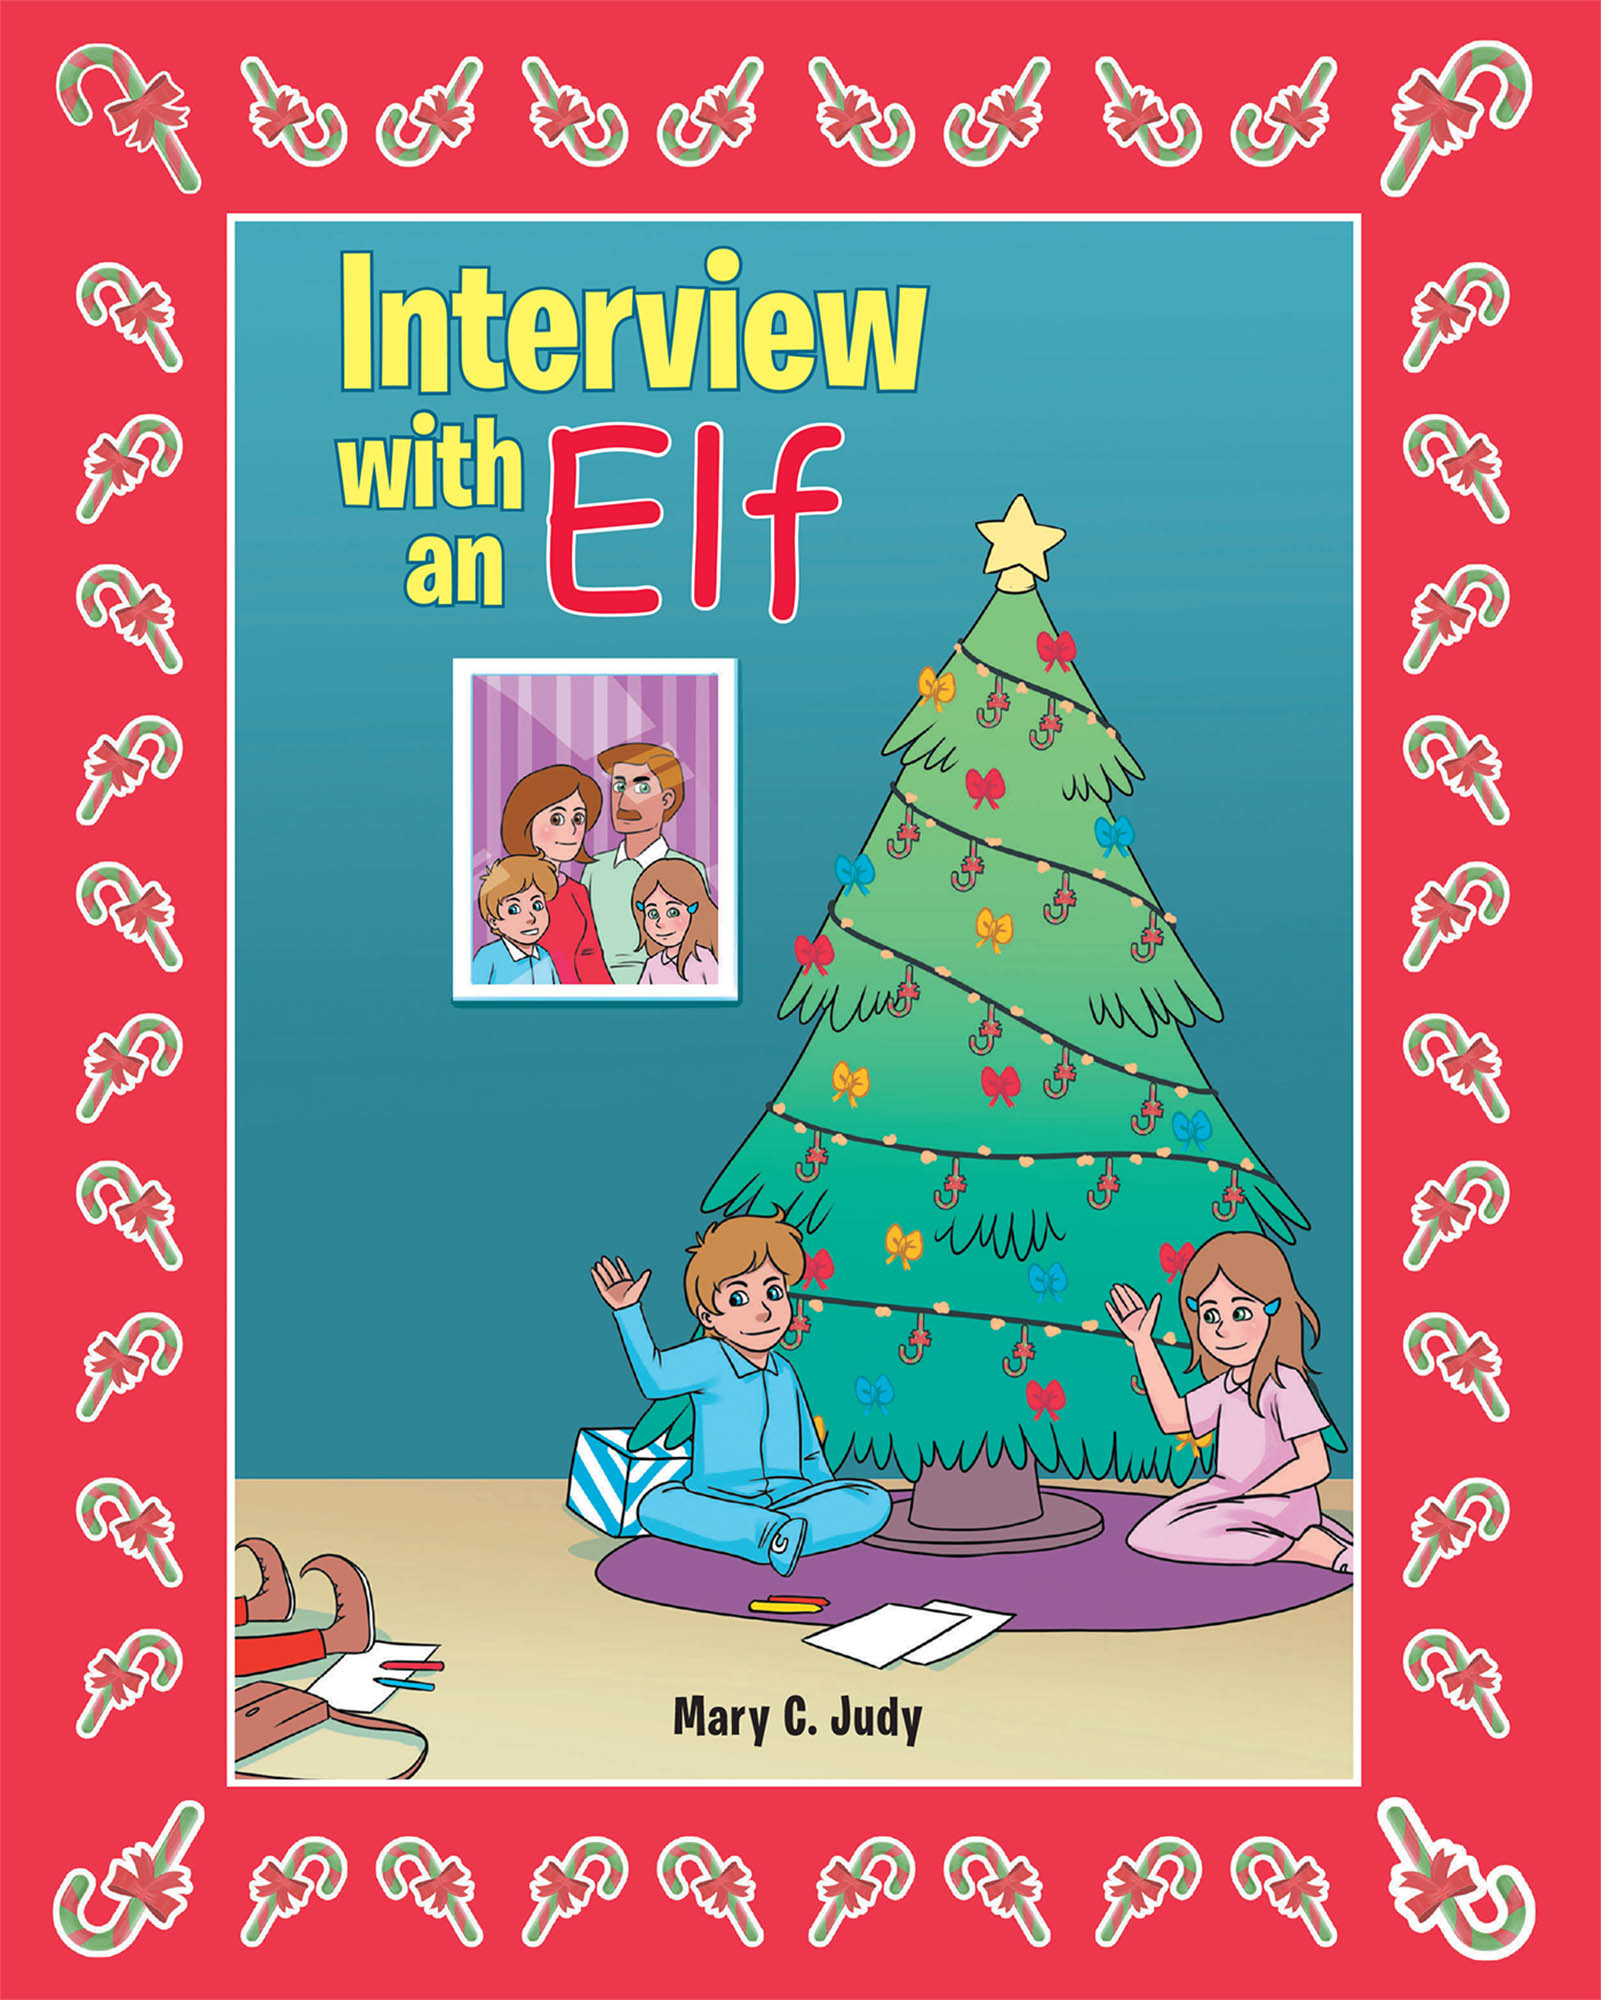 Mary C Judy S New Book Interview With An Elf Is A Tale About A Christmas Elf S Journey To Fulfill His Lifelong Dream Of Interviewing Children Newswire